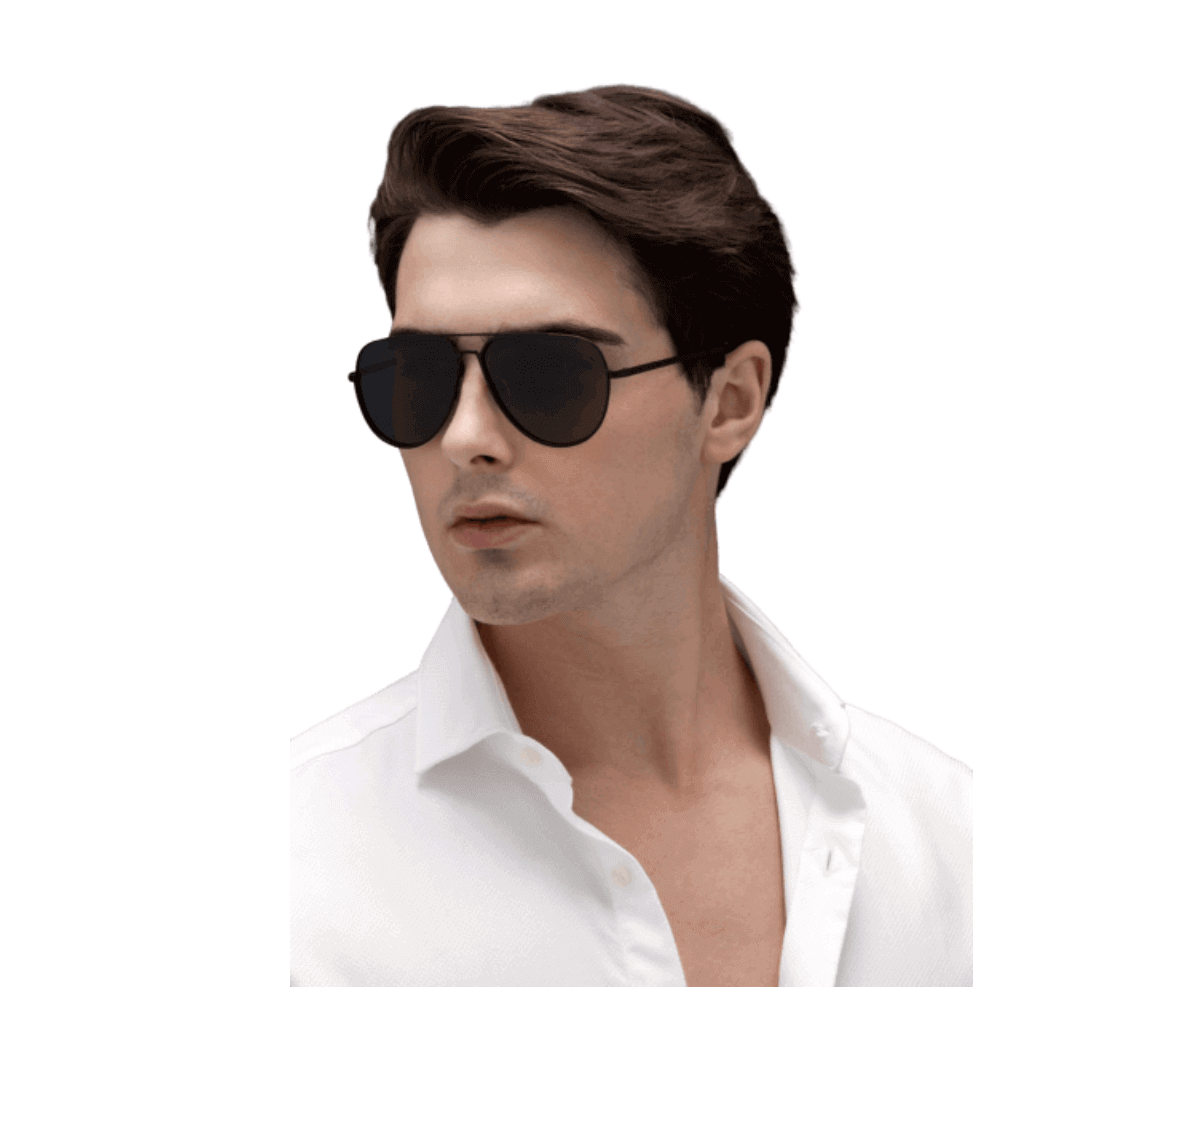 Chinese Sunglasses Manufacturers - Sunglasses Factory in China_mens sunglasses